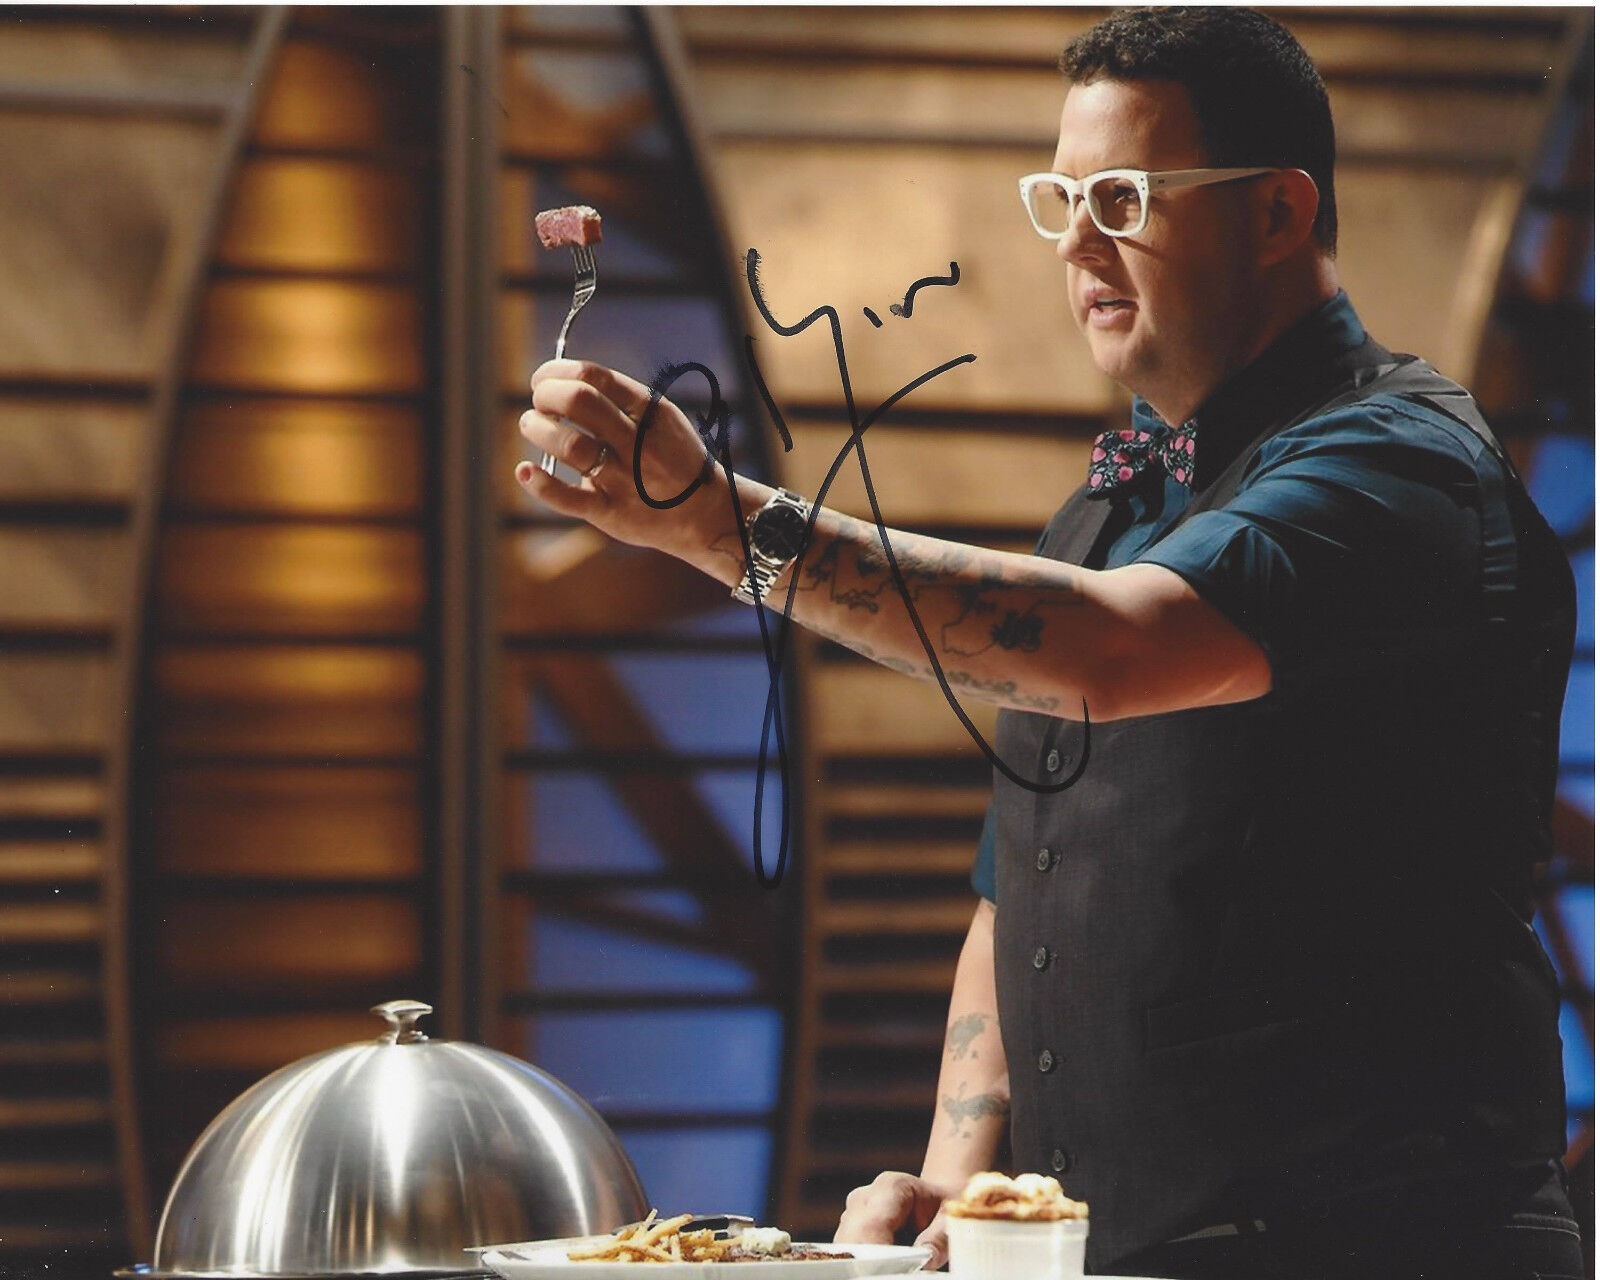 GRAHAM ELLIOT SIGNED AUTHENTIC 8X10 Photo Poster painting B w/COA TOP CHEF COOK MASTERCHEF